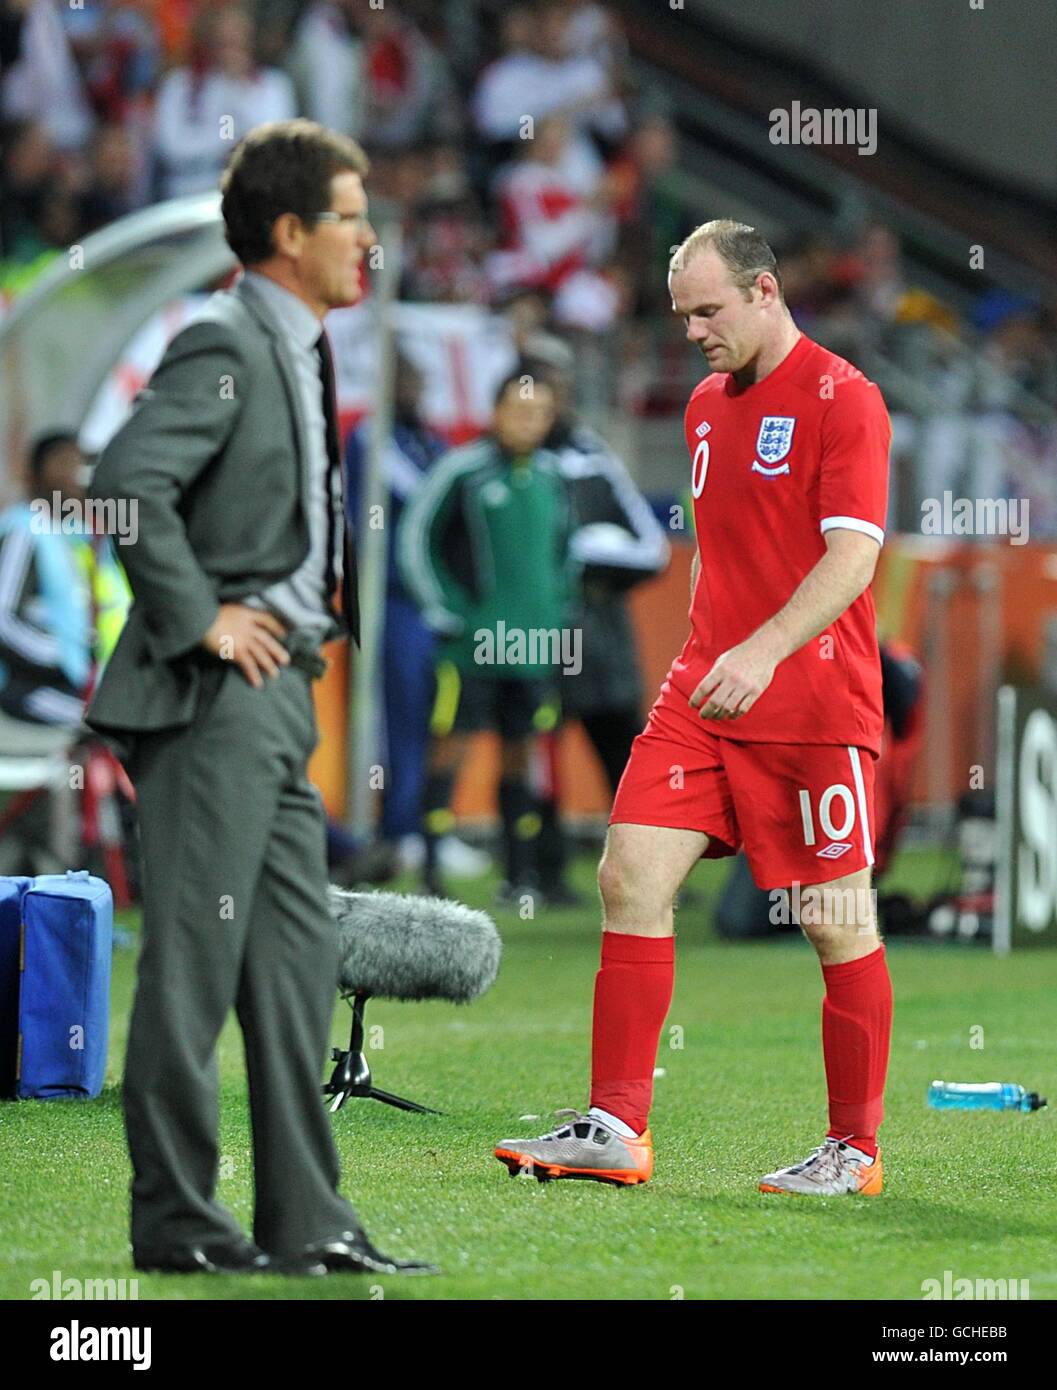 Soccer - 2010 FIFA World Cup South Africa - Group C - Slovenia v England - Nelson Mandela Bay Stadium. England's Wayne Rooney (right) walks past manager Fabio Capello (left) dejected as he is substituted Stock Photo